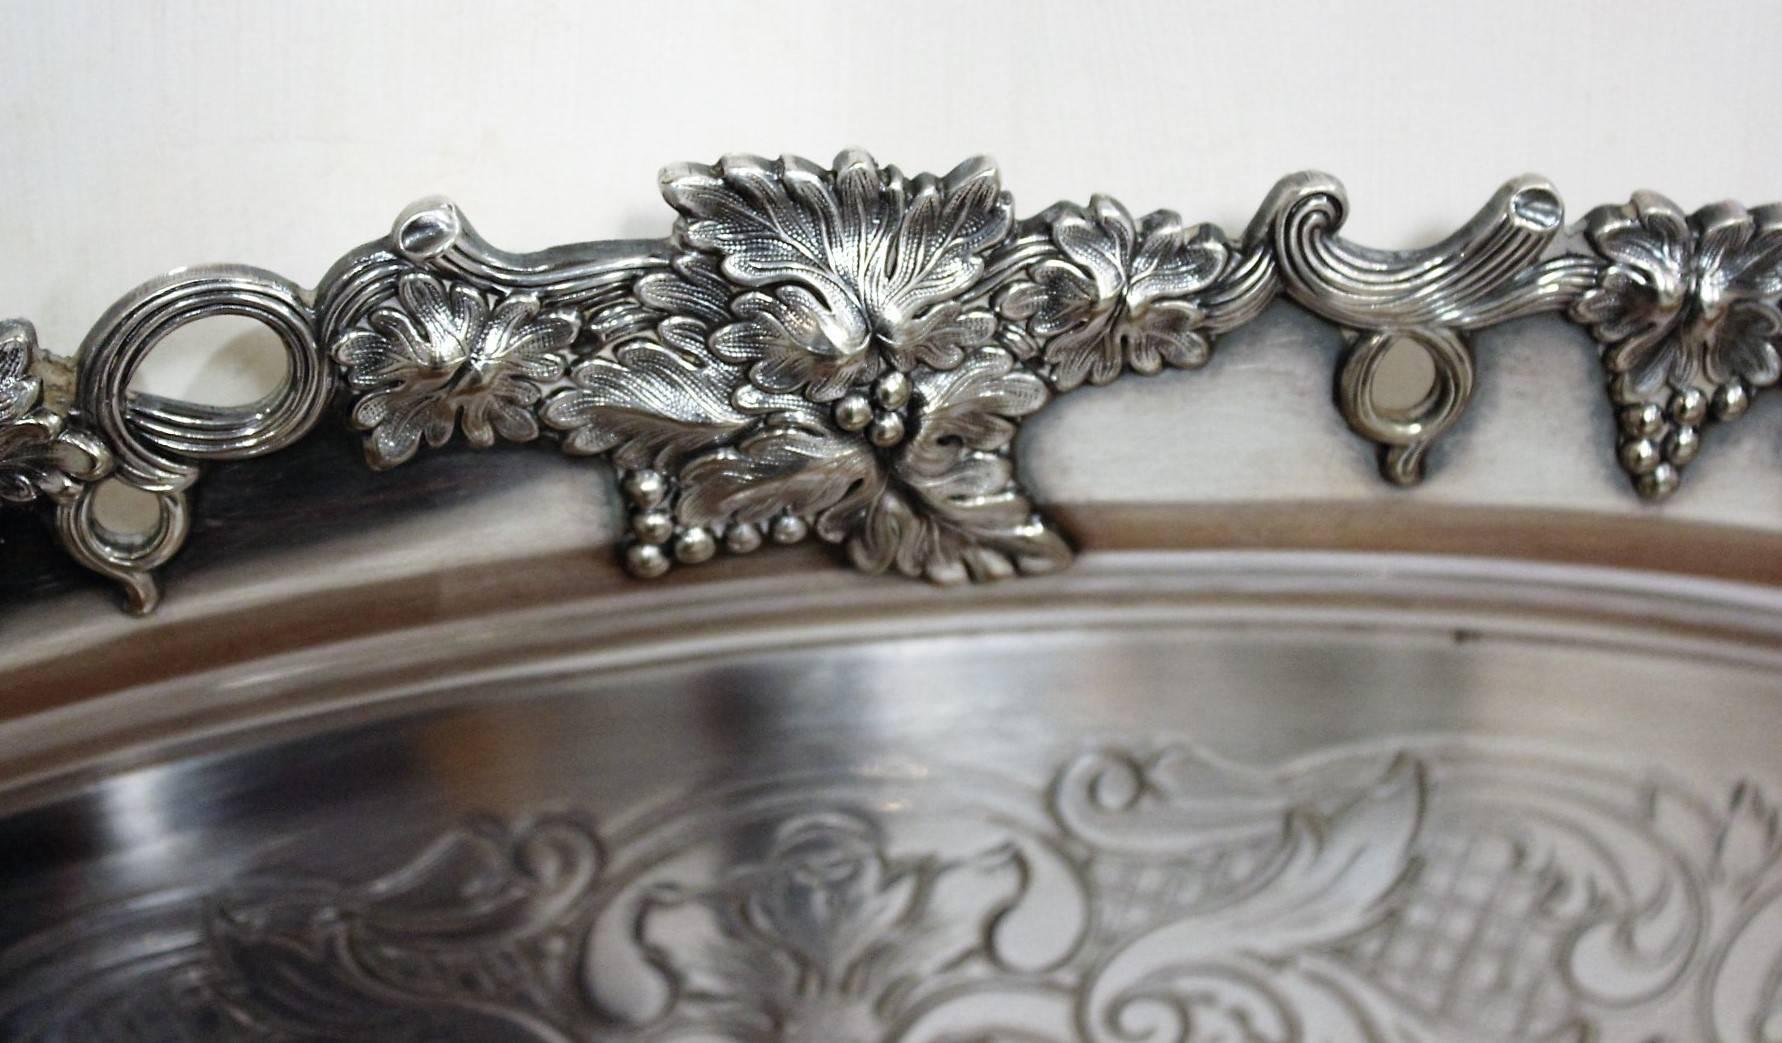 Antique English engraved waiters tray with pierced edge. Beautifully cast handles with engraved tray surface. This tray was made in England for the Gorham silver company and marked England and Gorham, the markings on the back date to  Circa